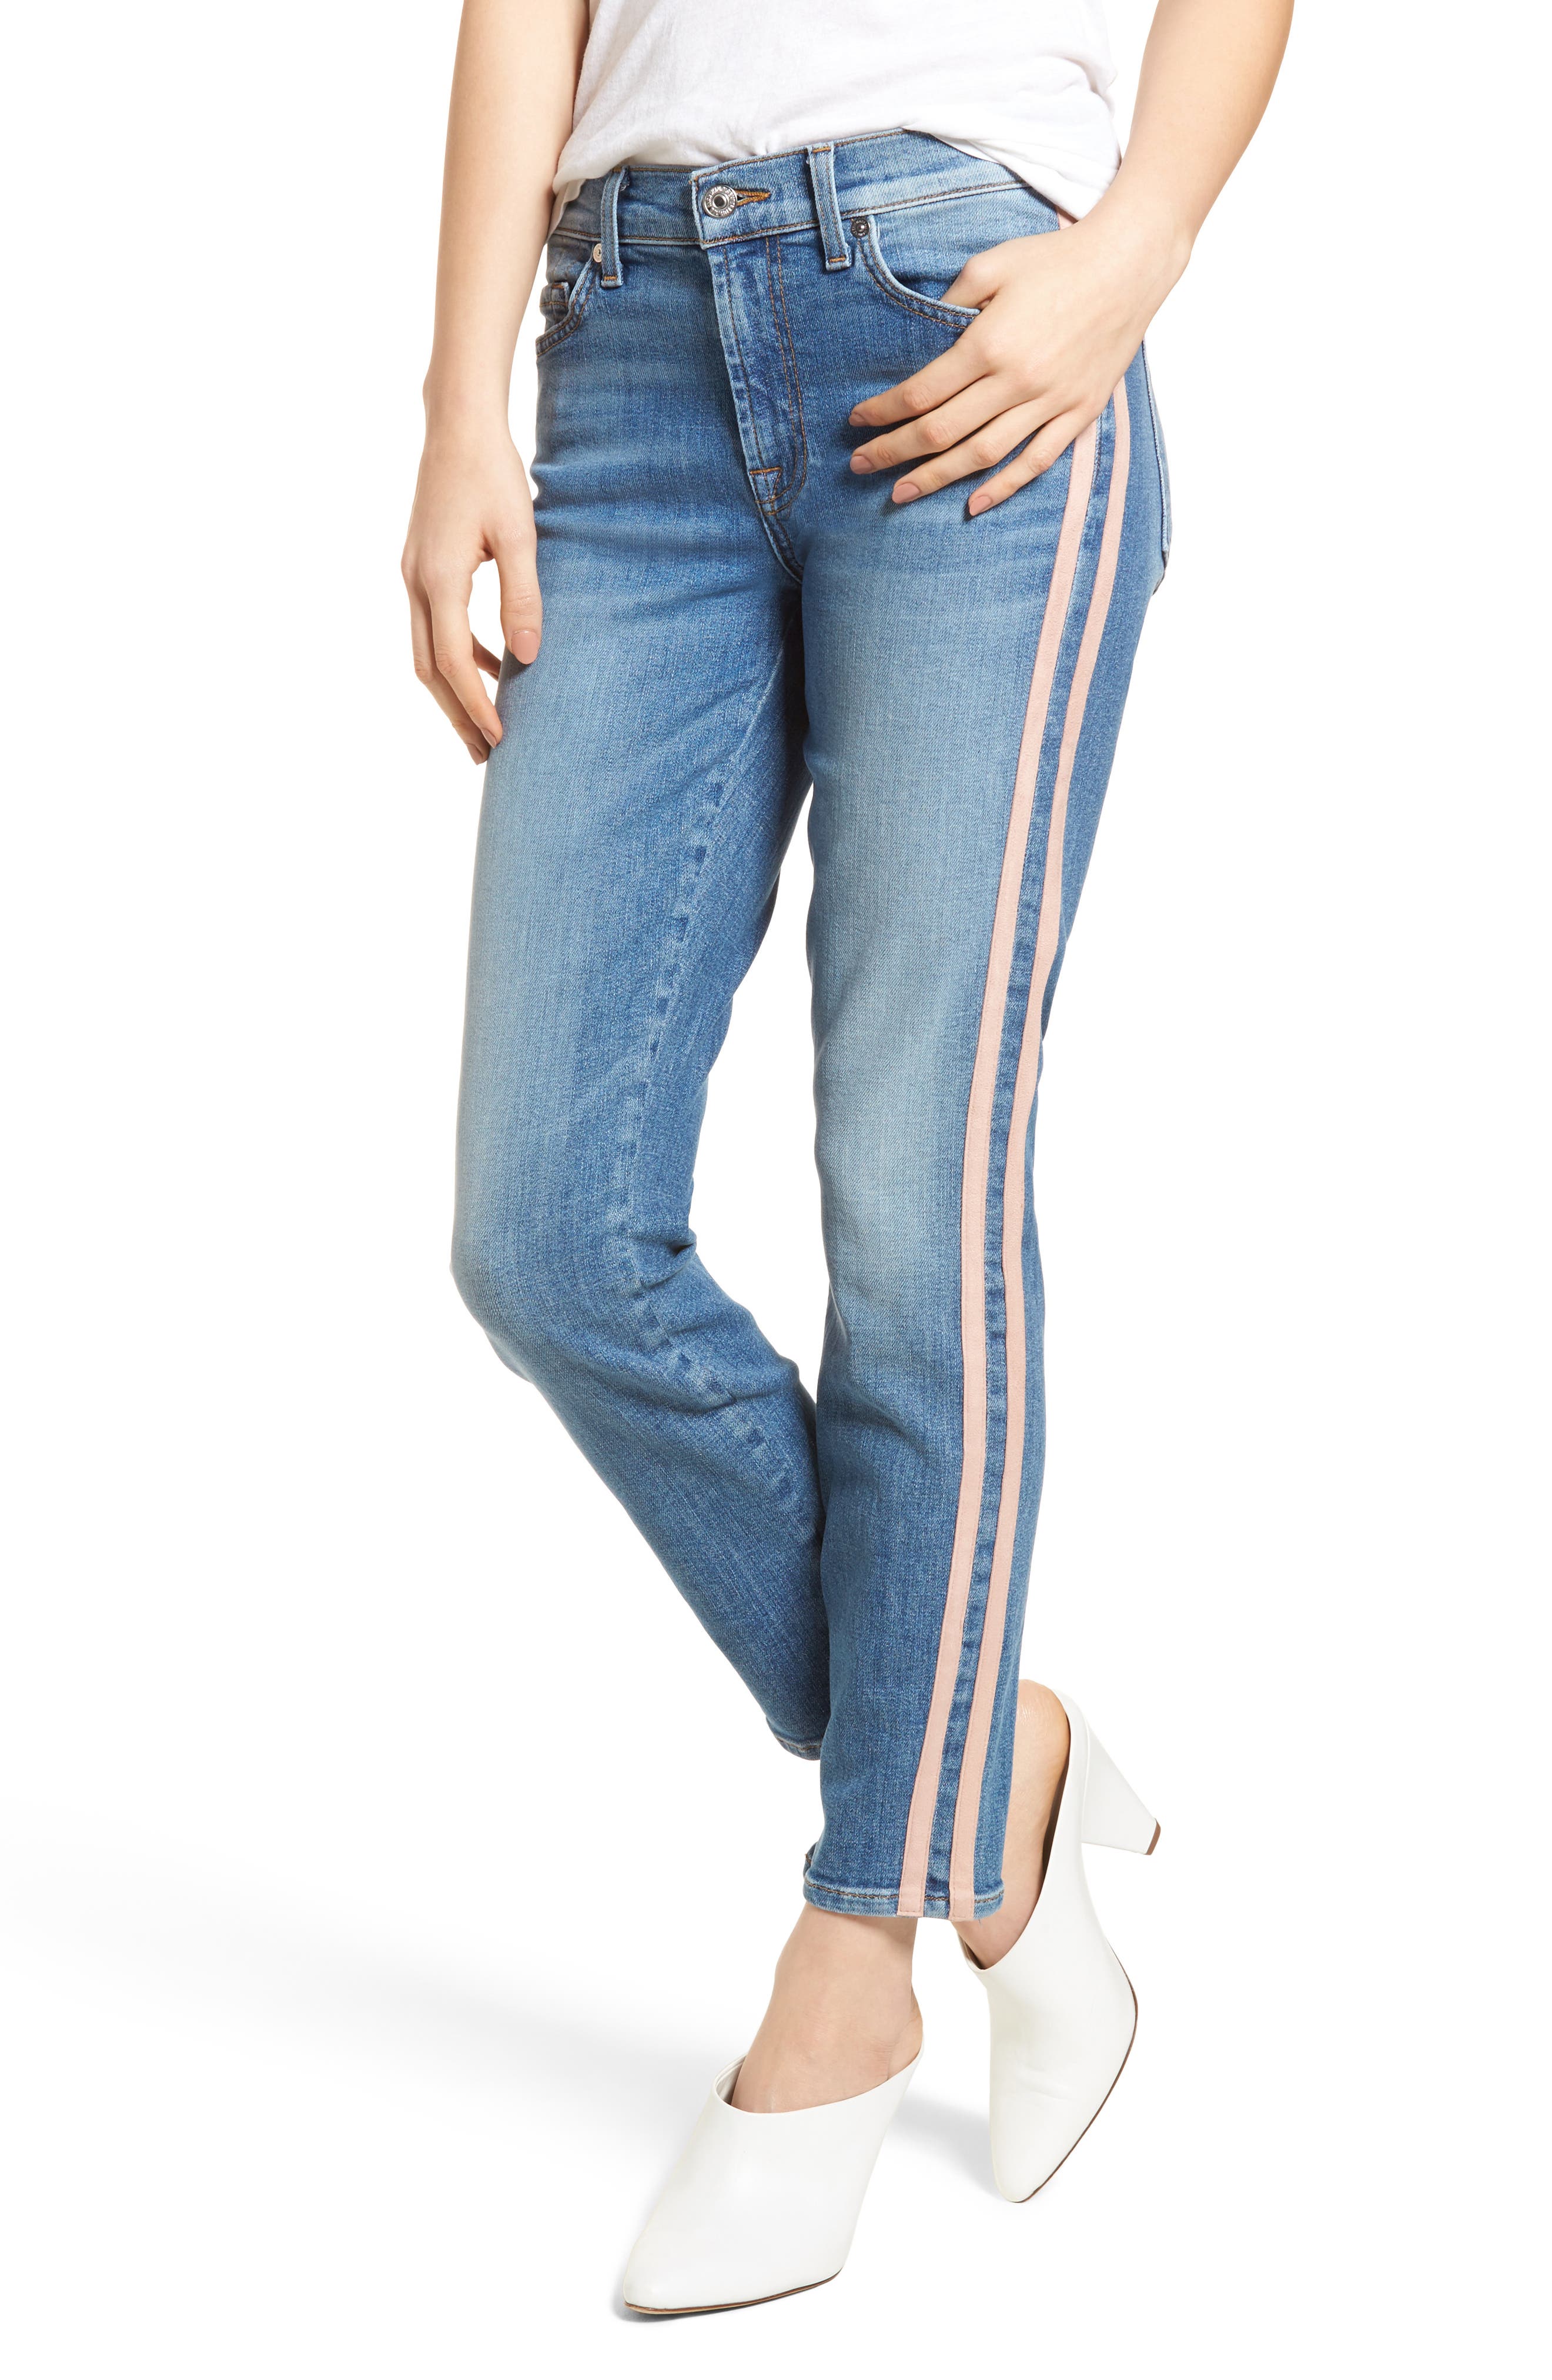 7 for all mankind pink jeans